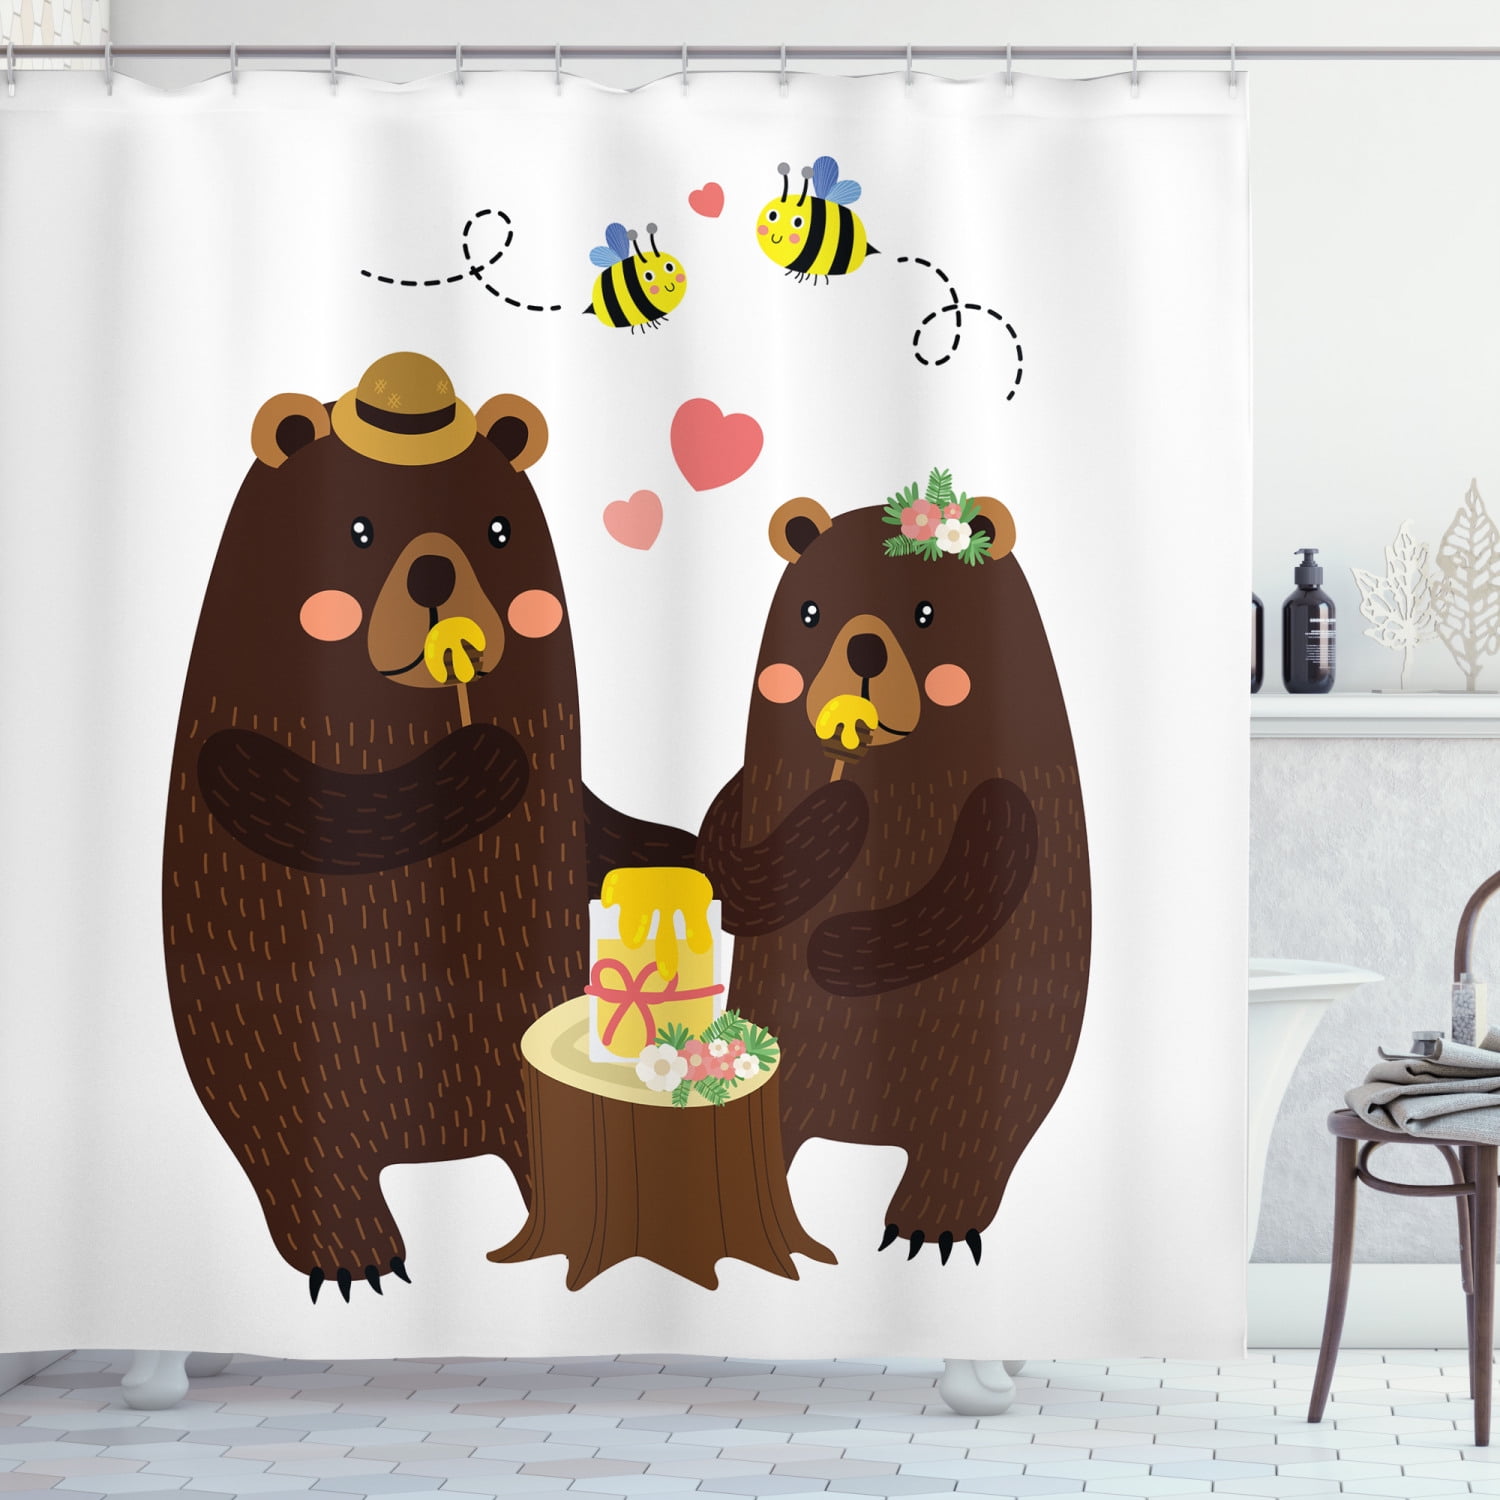 Brown bears and forest Shower Curtain Bathroom Decor Waterproof Fabric & 12Hooks 